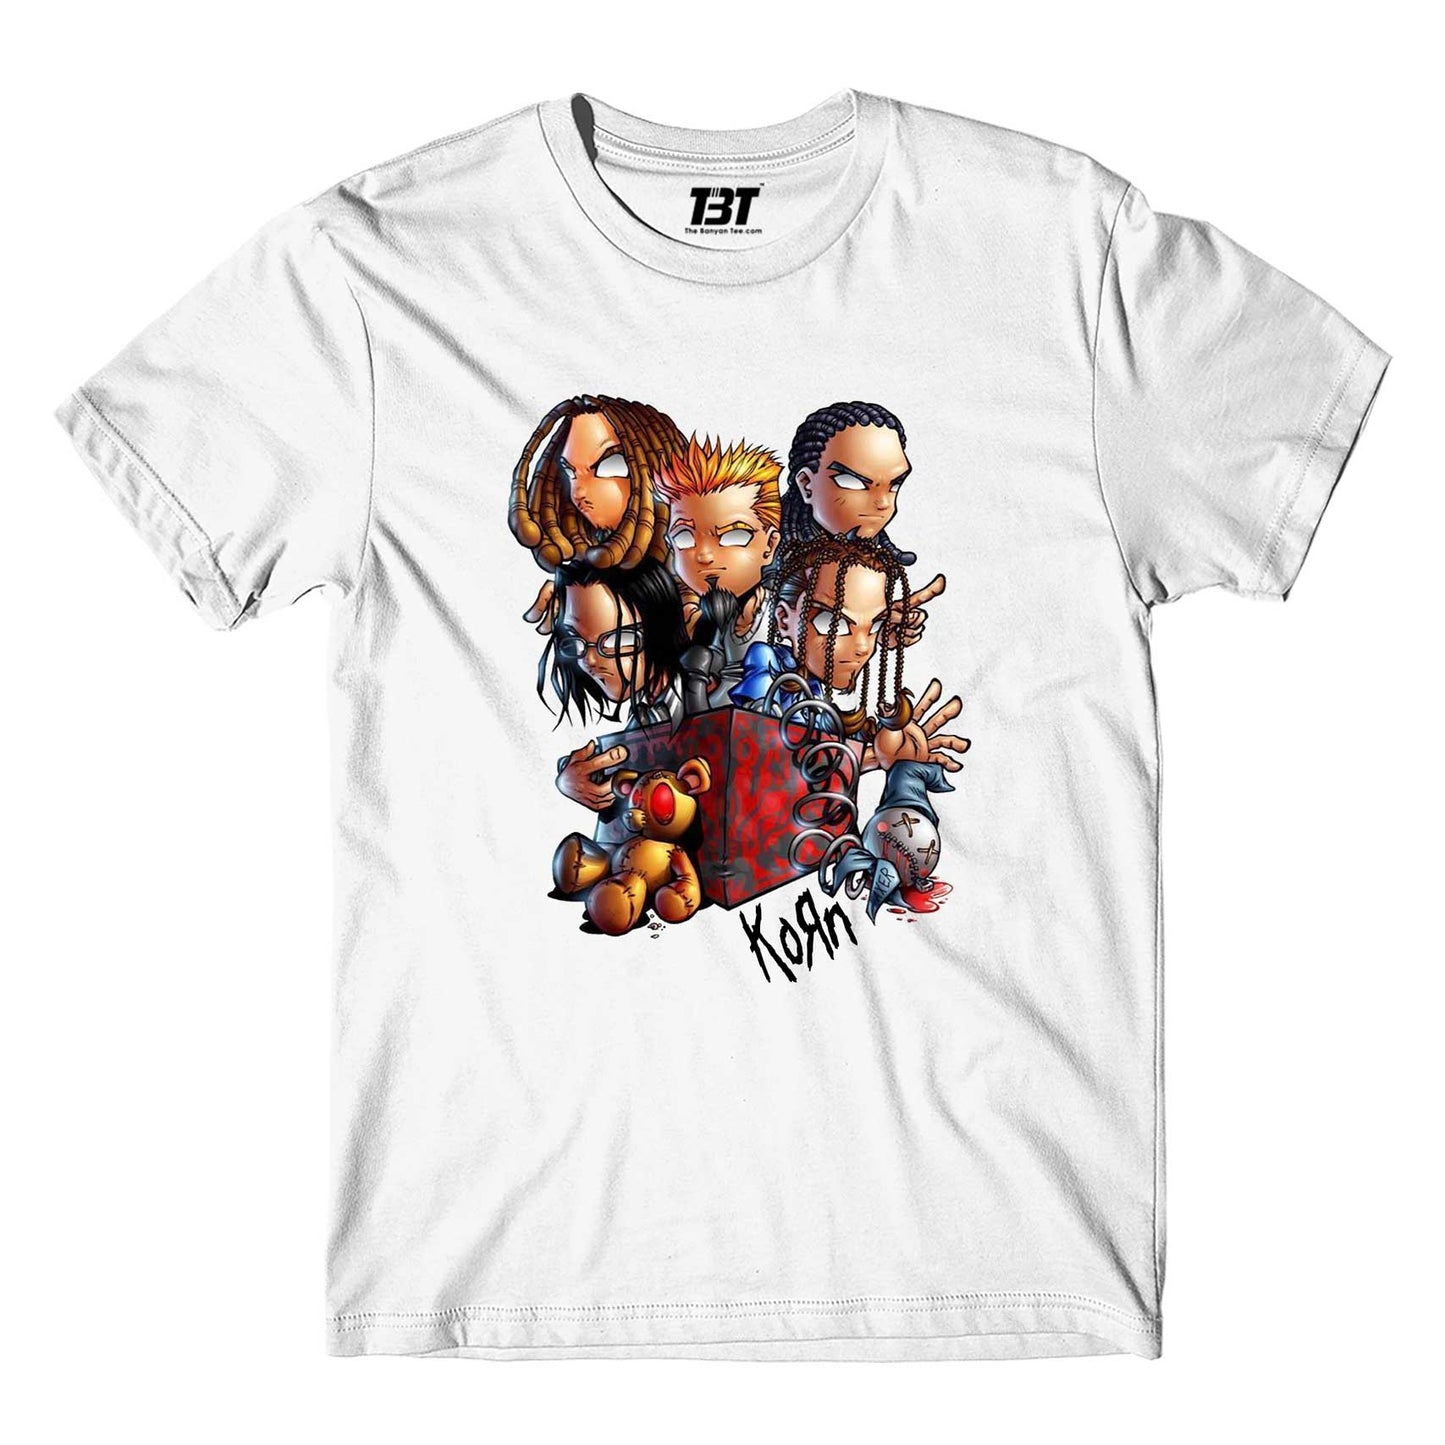 the banyan tee merch on sale Korn T shirt - On Sale - XS (Chest size 36 IN)